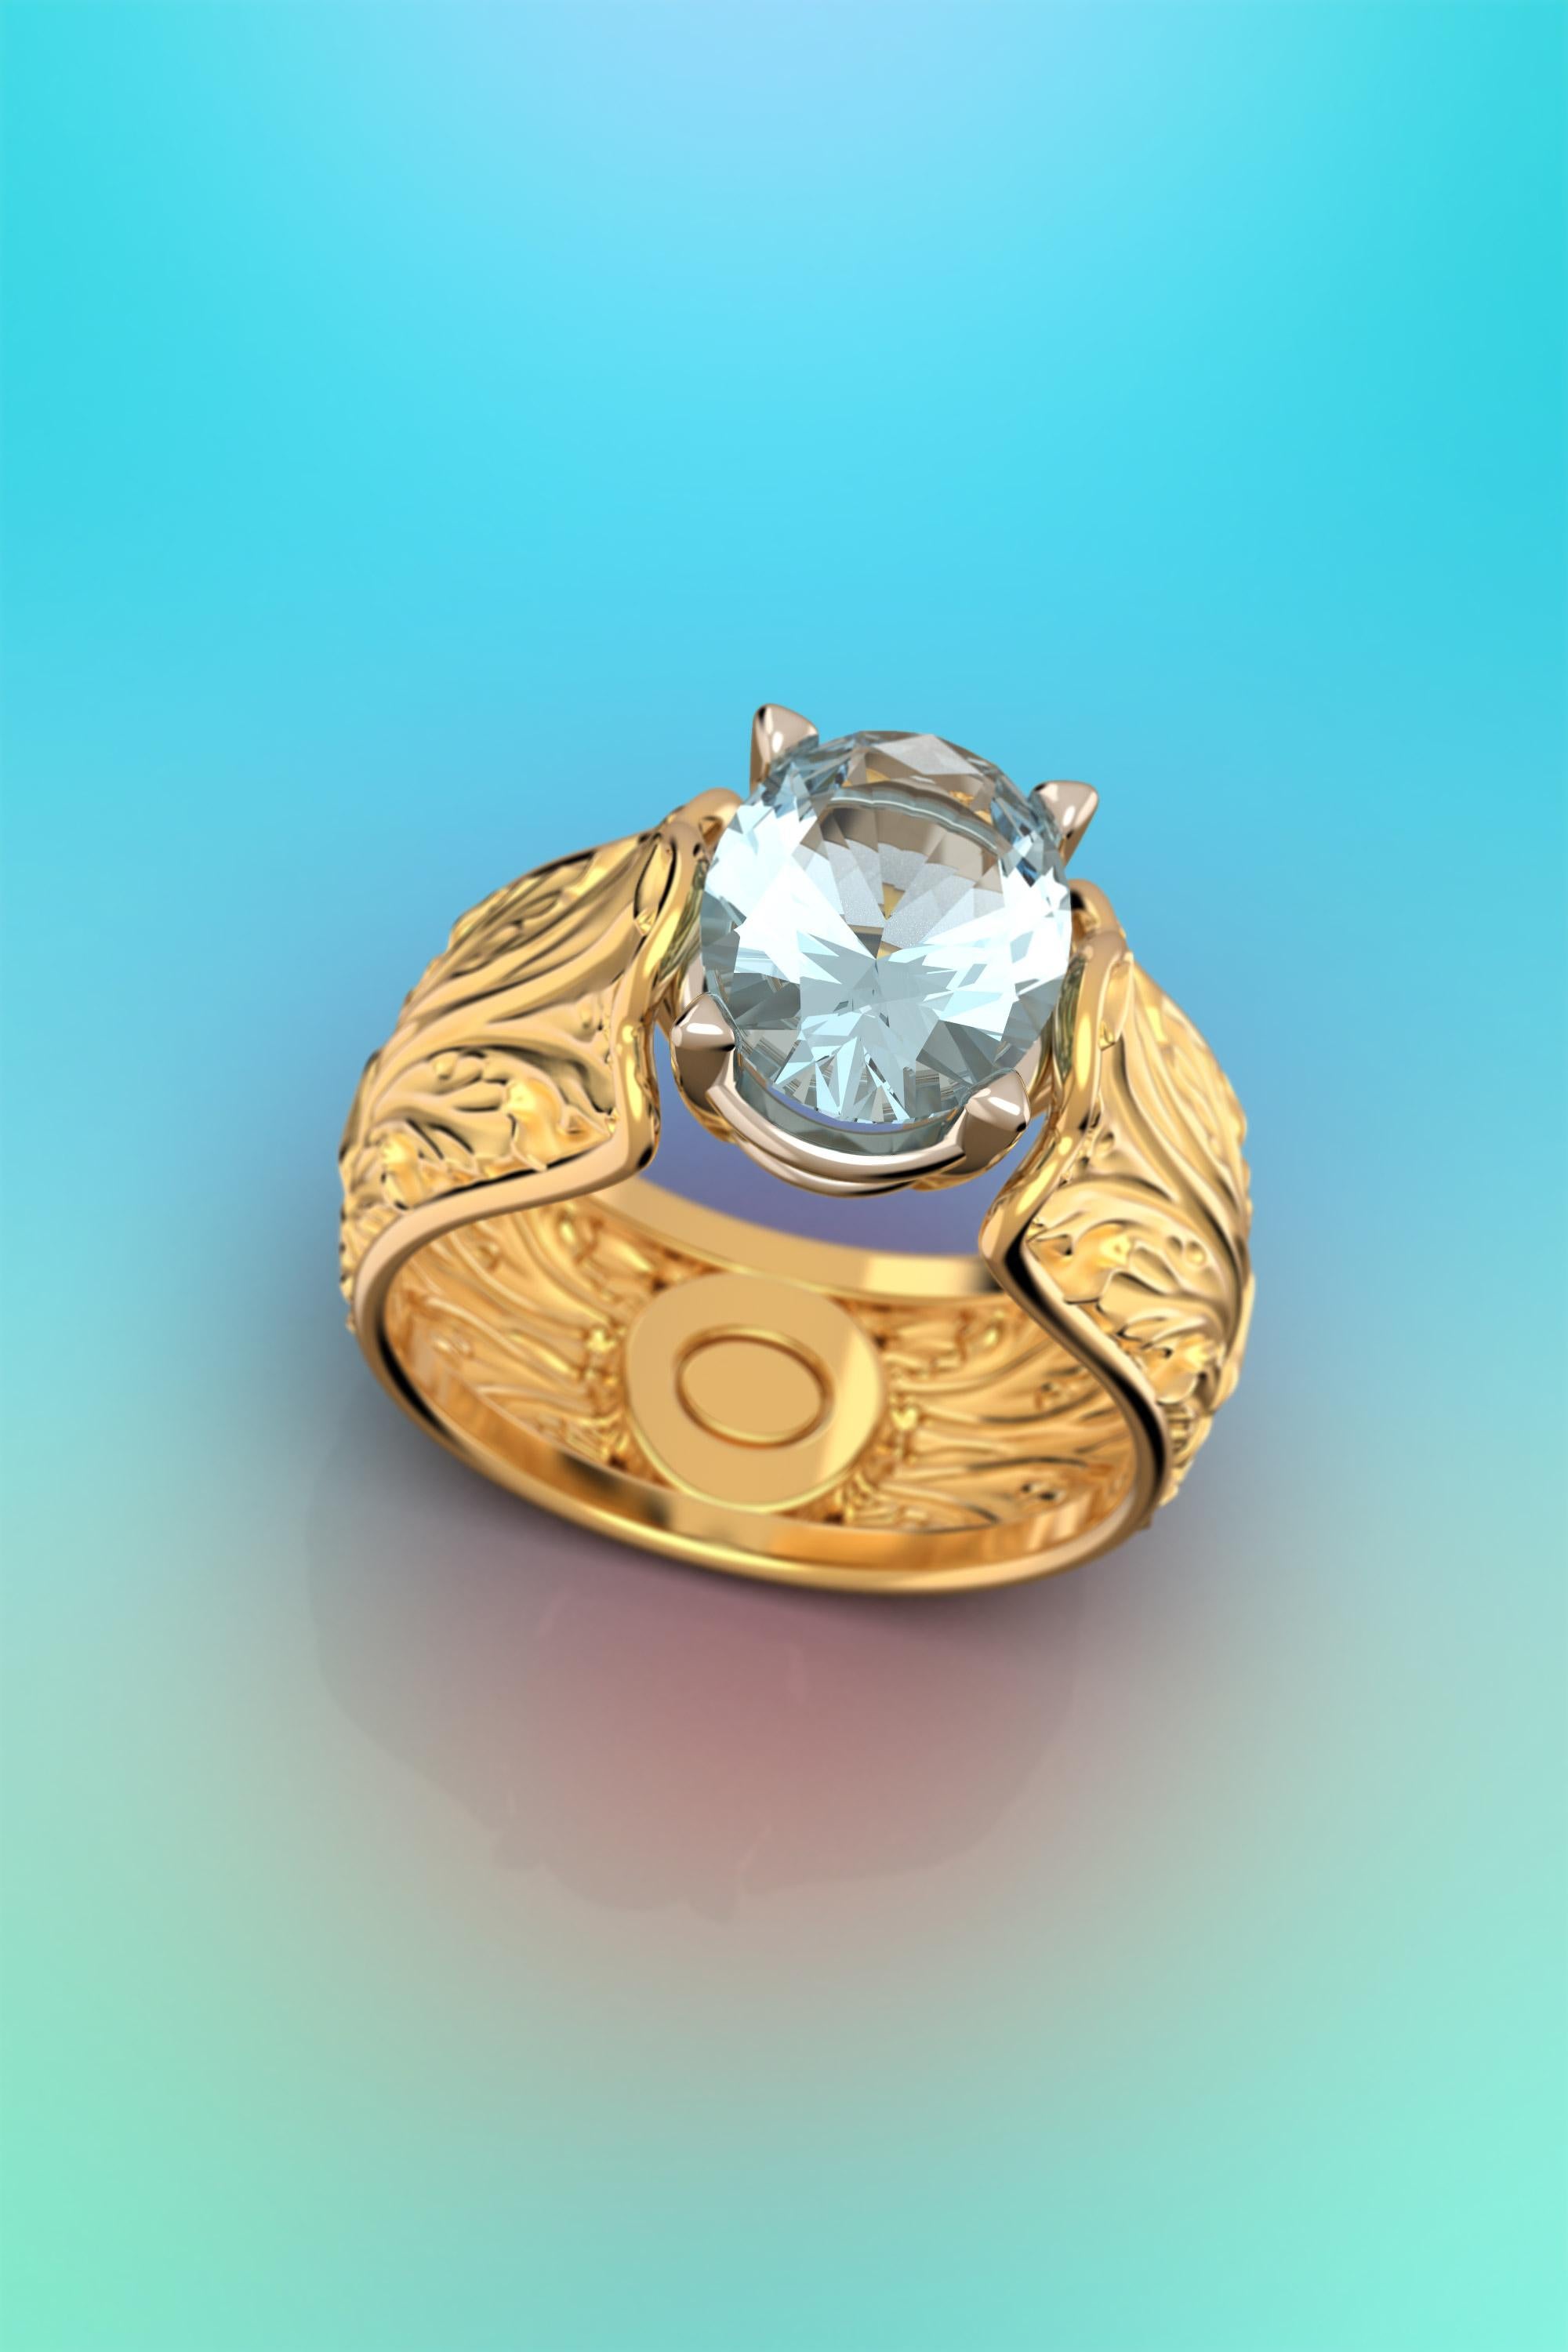 For Sale:  Baroque 18k Gold Ring with Natural Aquamarine Italian Fine Jewelry Made in Italy 2